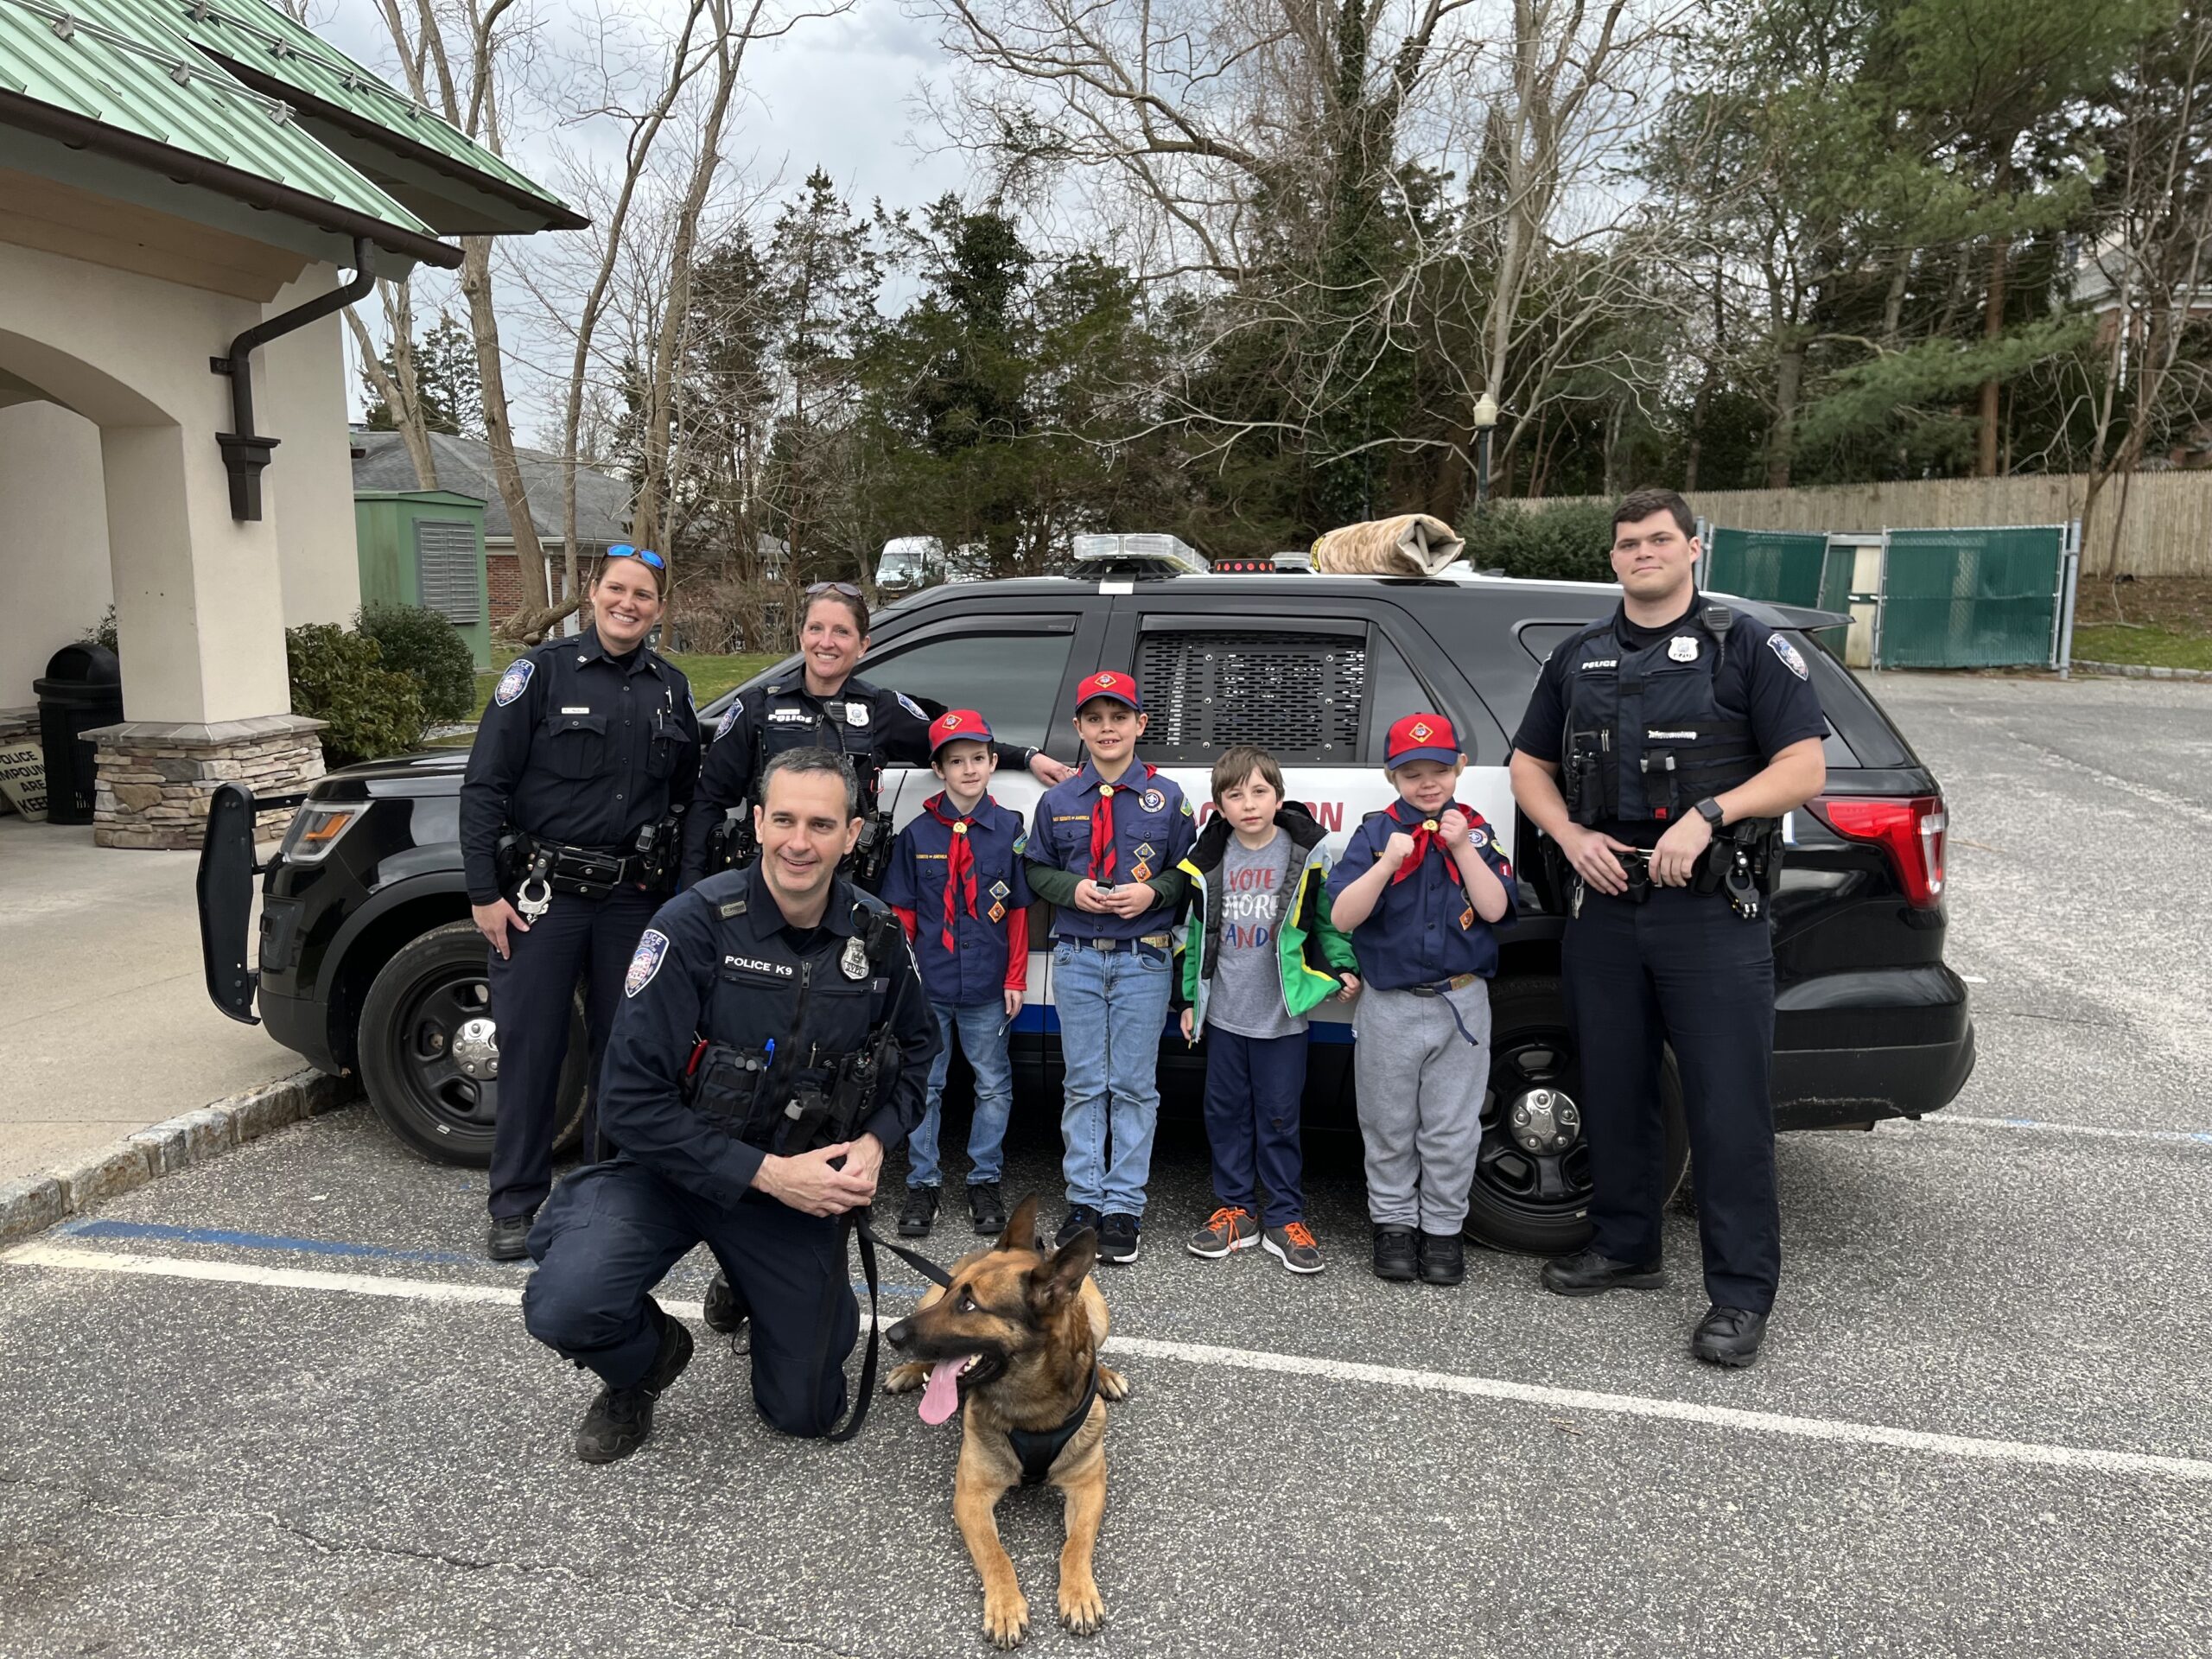 Members of Cub Scout Pack 14 Wolf Den visited Southampton Village Police headquarters on April 1 to work toward earning their “Council Fire” and “Hometown Heroes” achievements. Officers Tiffany Lubold and Lisa McCulley gave the Scouts a tour, and Officers James Moore and Thomas Cummings gave them a demonstrations with the help of K9 Officer Topper. COURTESY CHRIS CAPALBO